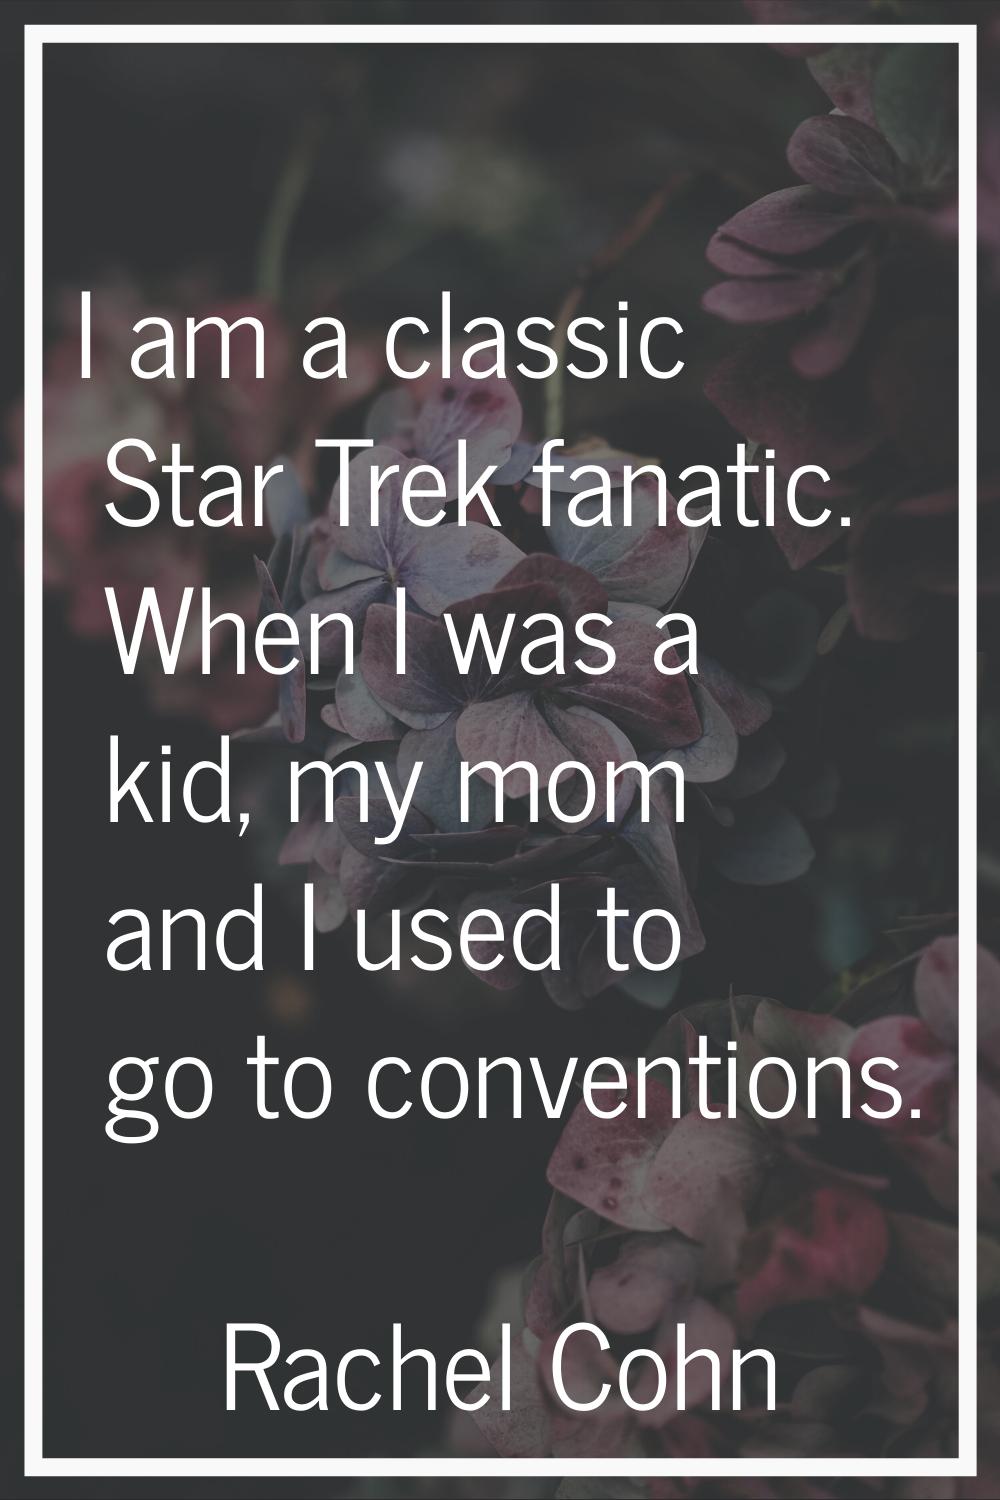 I am a classic Star Trek fanatic. When I was a kid, my mom and I used to go to conventions.